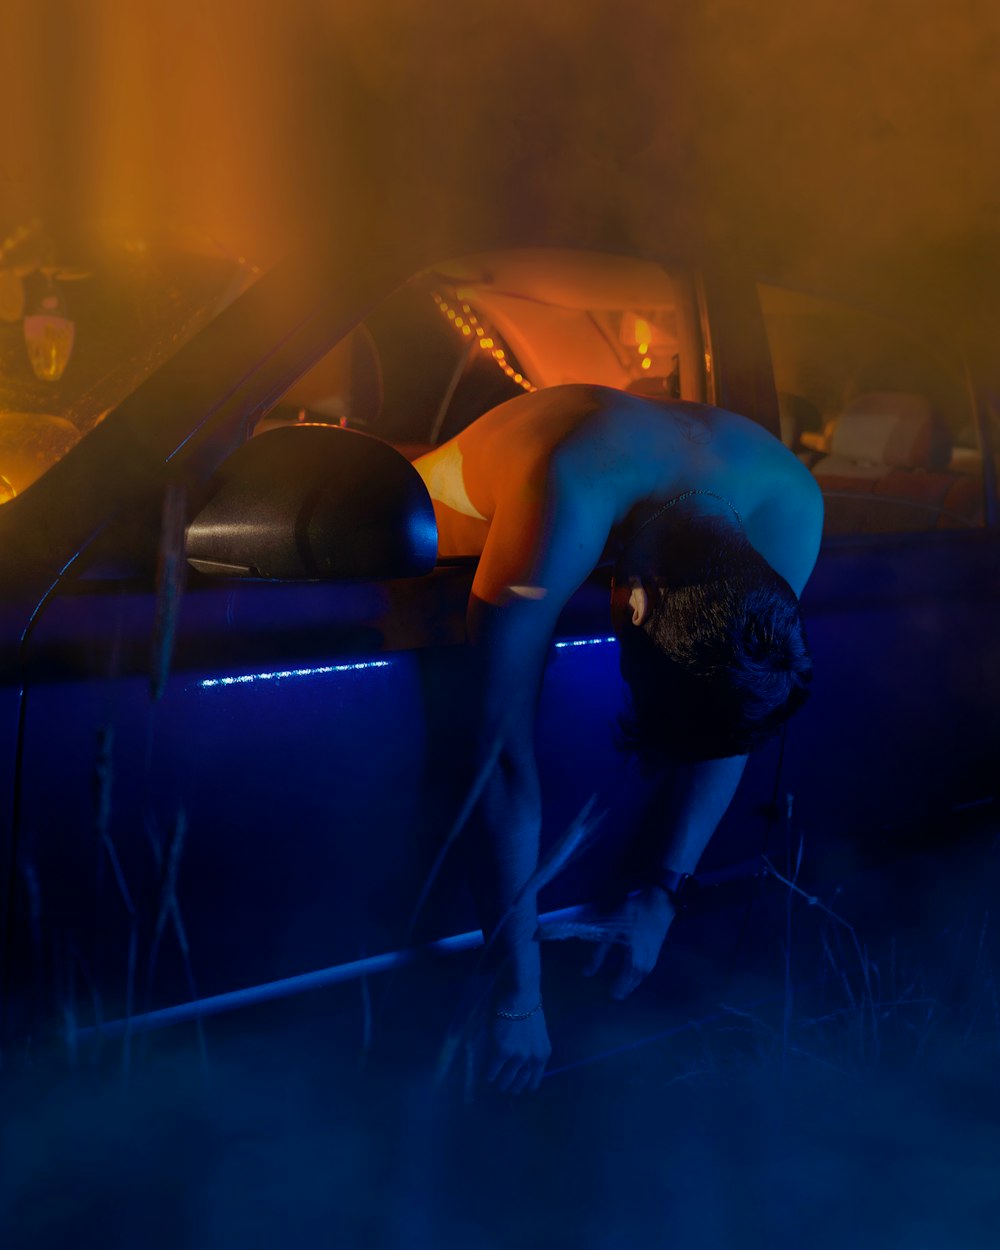 a naked woman leaning over a car in the dark